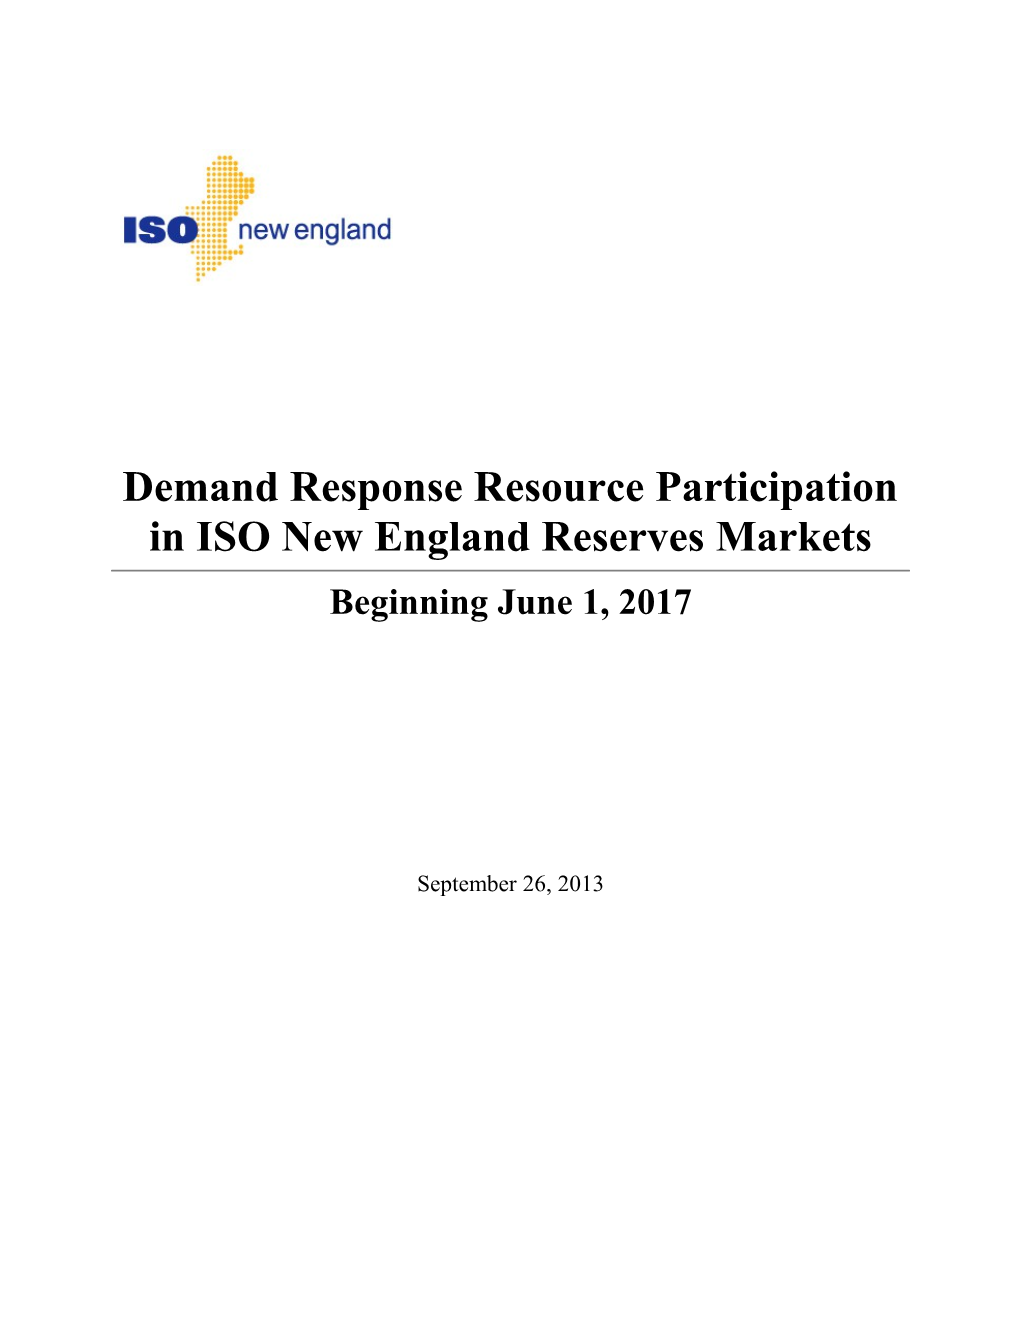 Demand Response Resource Participation in ISO New England Reserves Markets